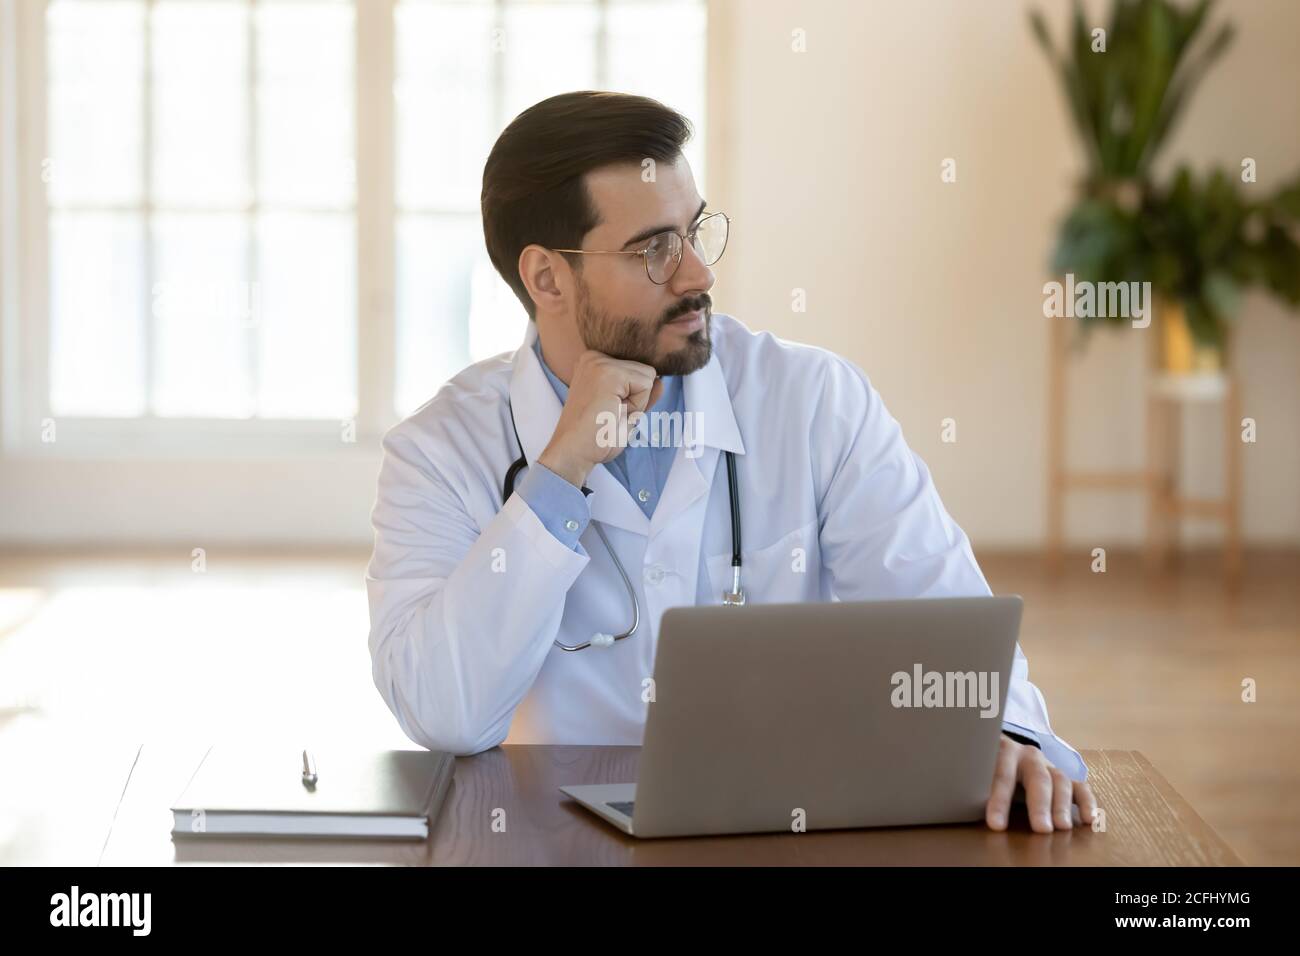 Thoughtful doctor wearing glasses working on laptop, pondering problem solution Stock Photo